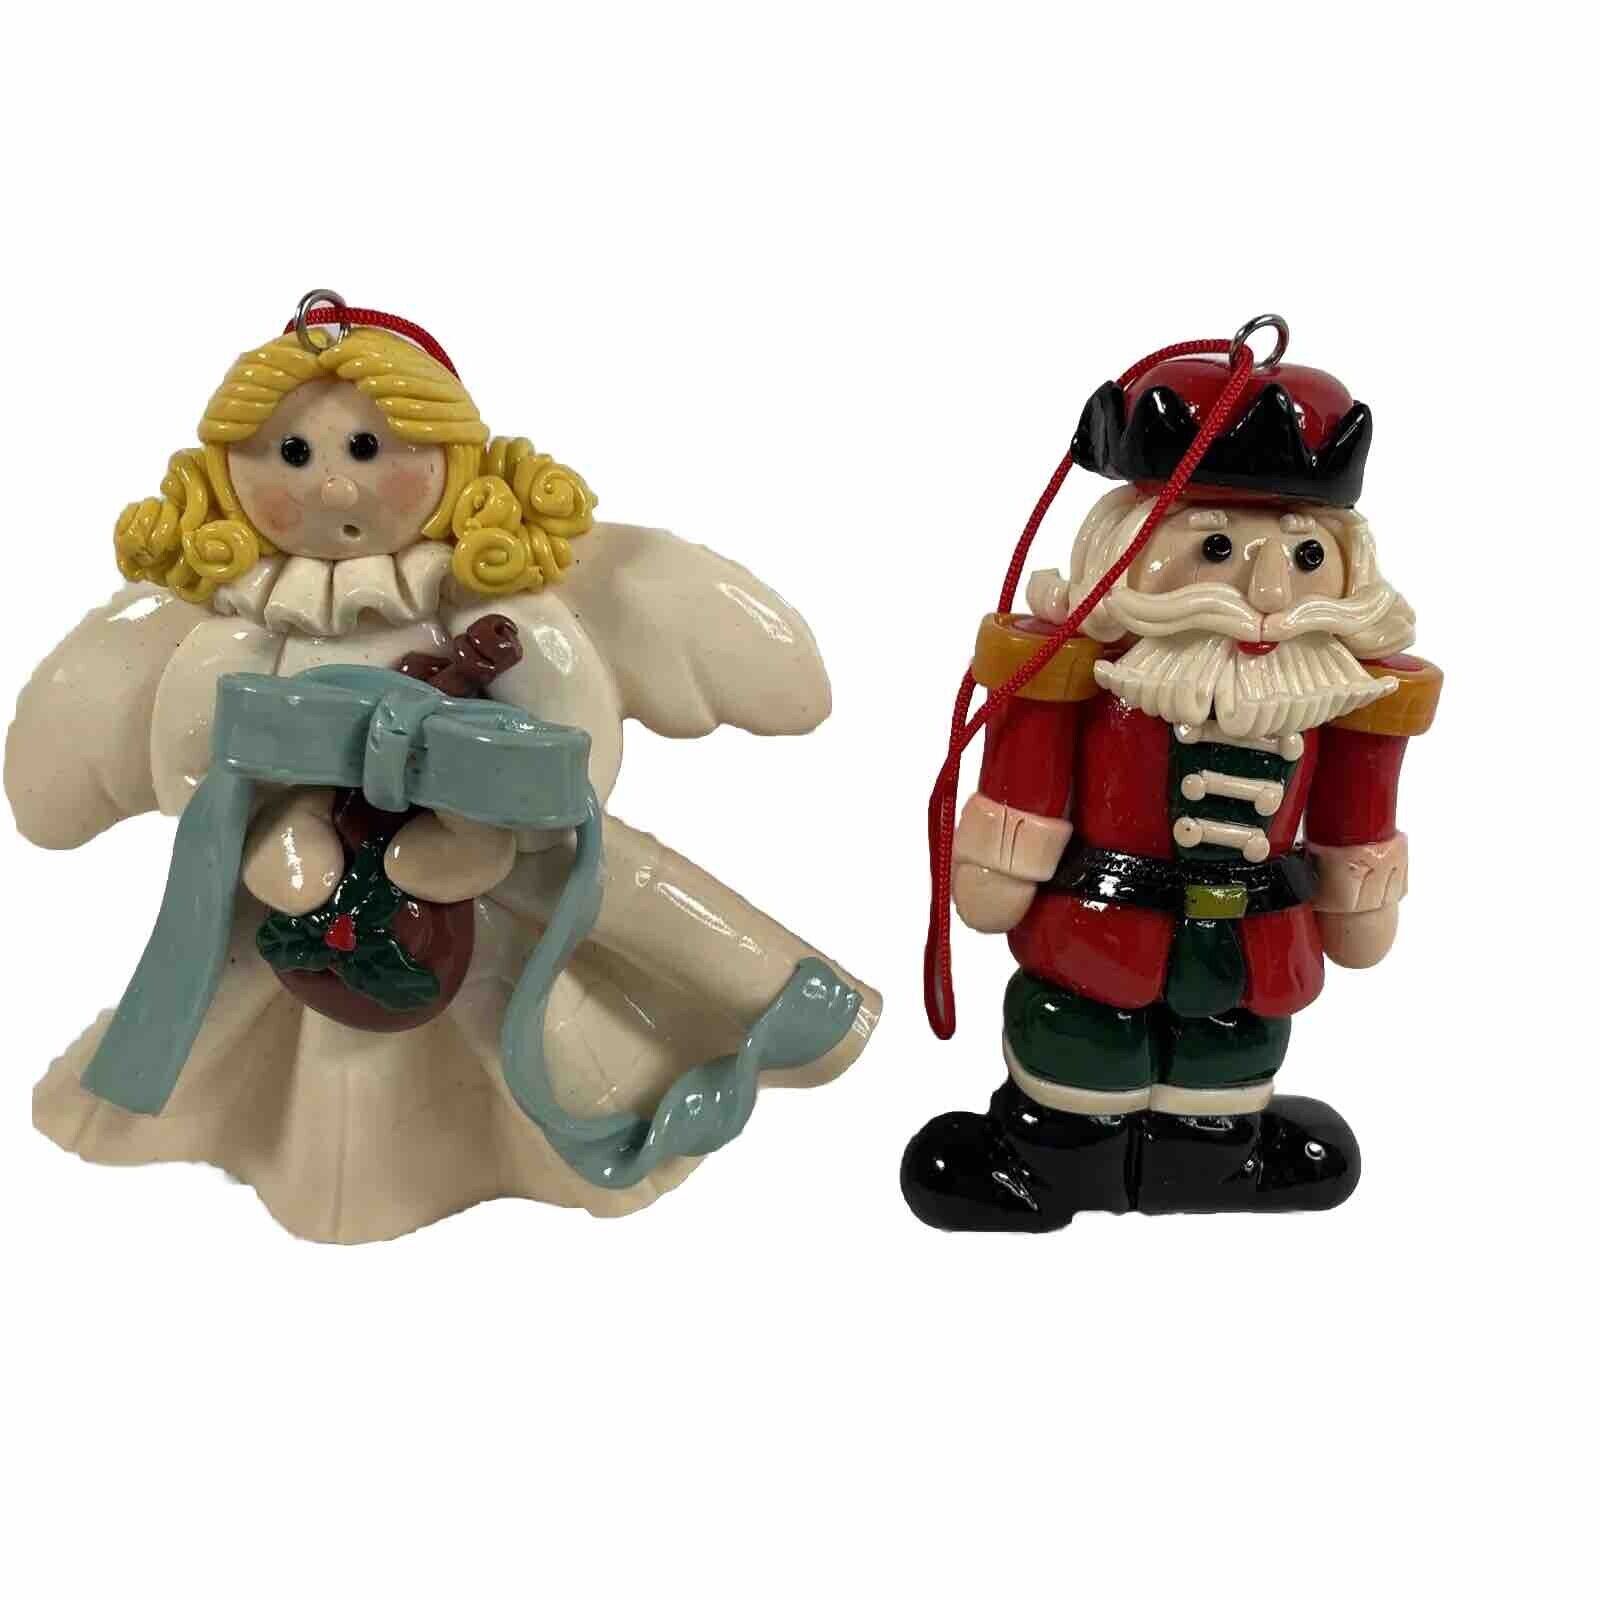 Vintage Handcrafted Polymer Clay Ornaments Angel & Soldier Detailed